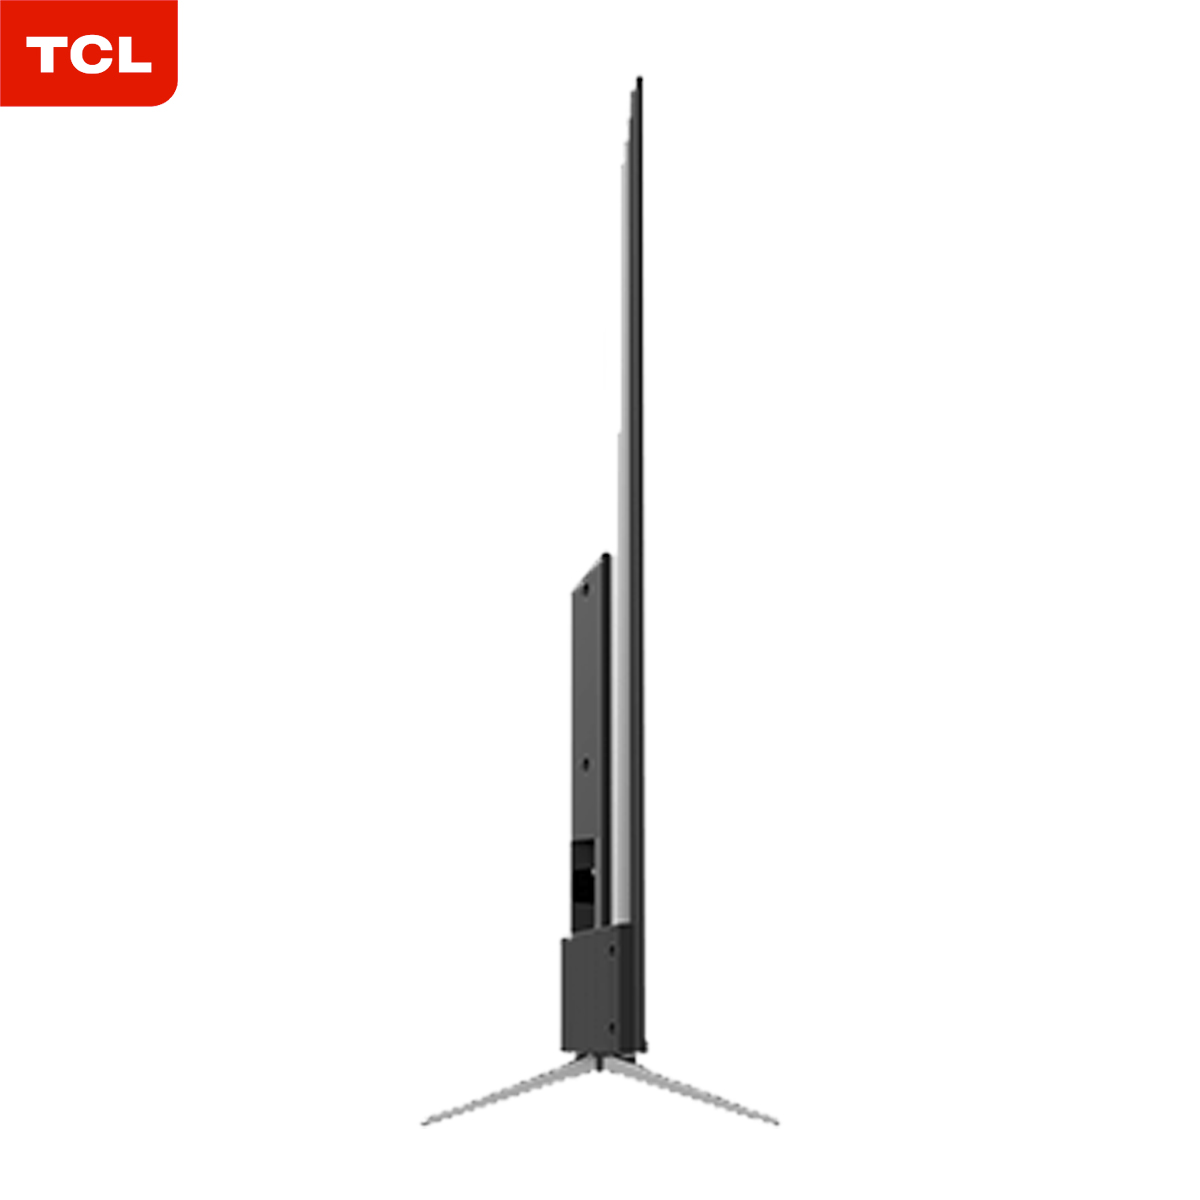 6.TCL 55C715